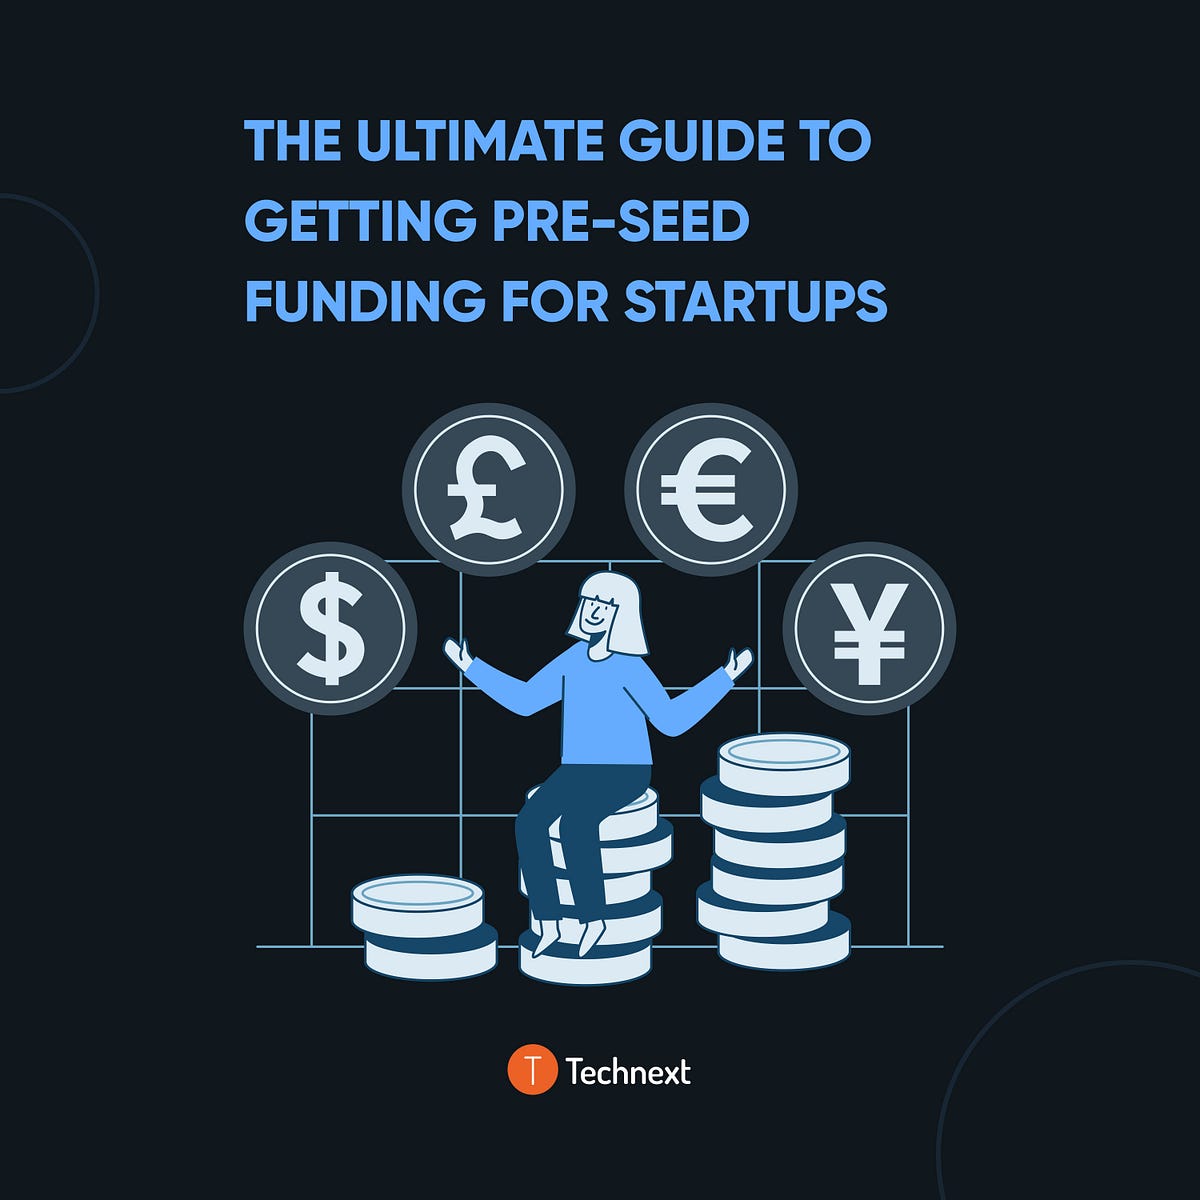 Mini-toolbox for raising pre-seed and seed rounds for startups all